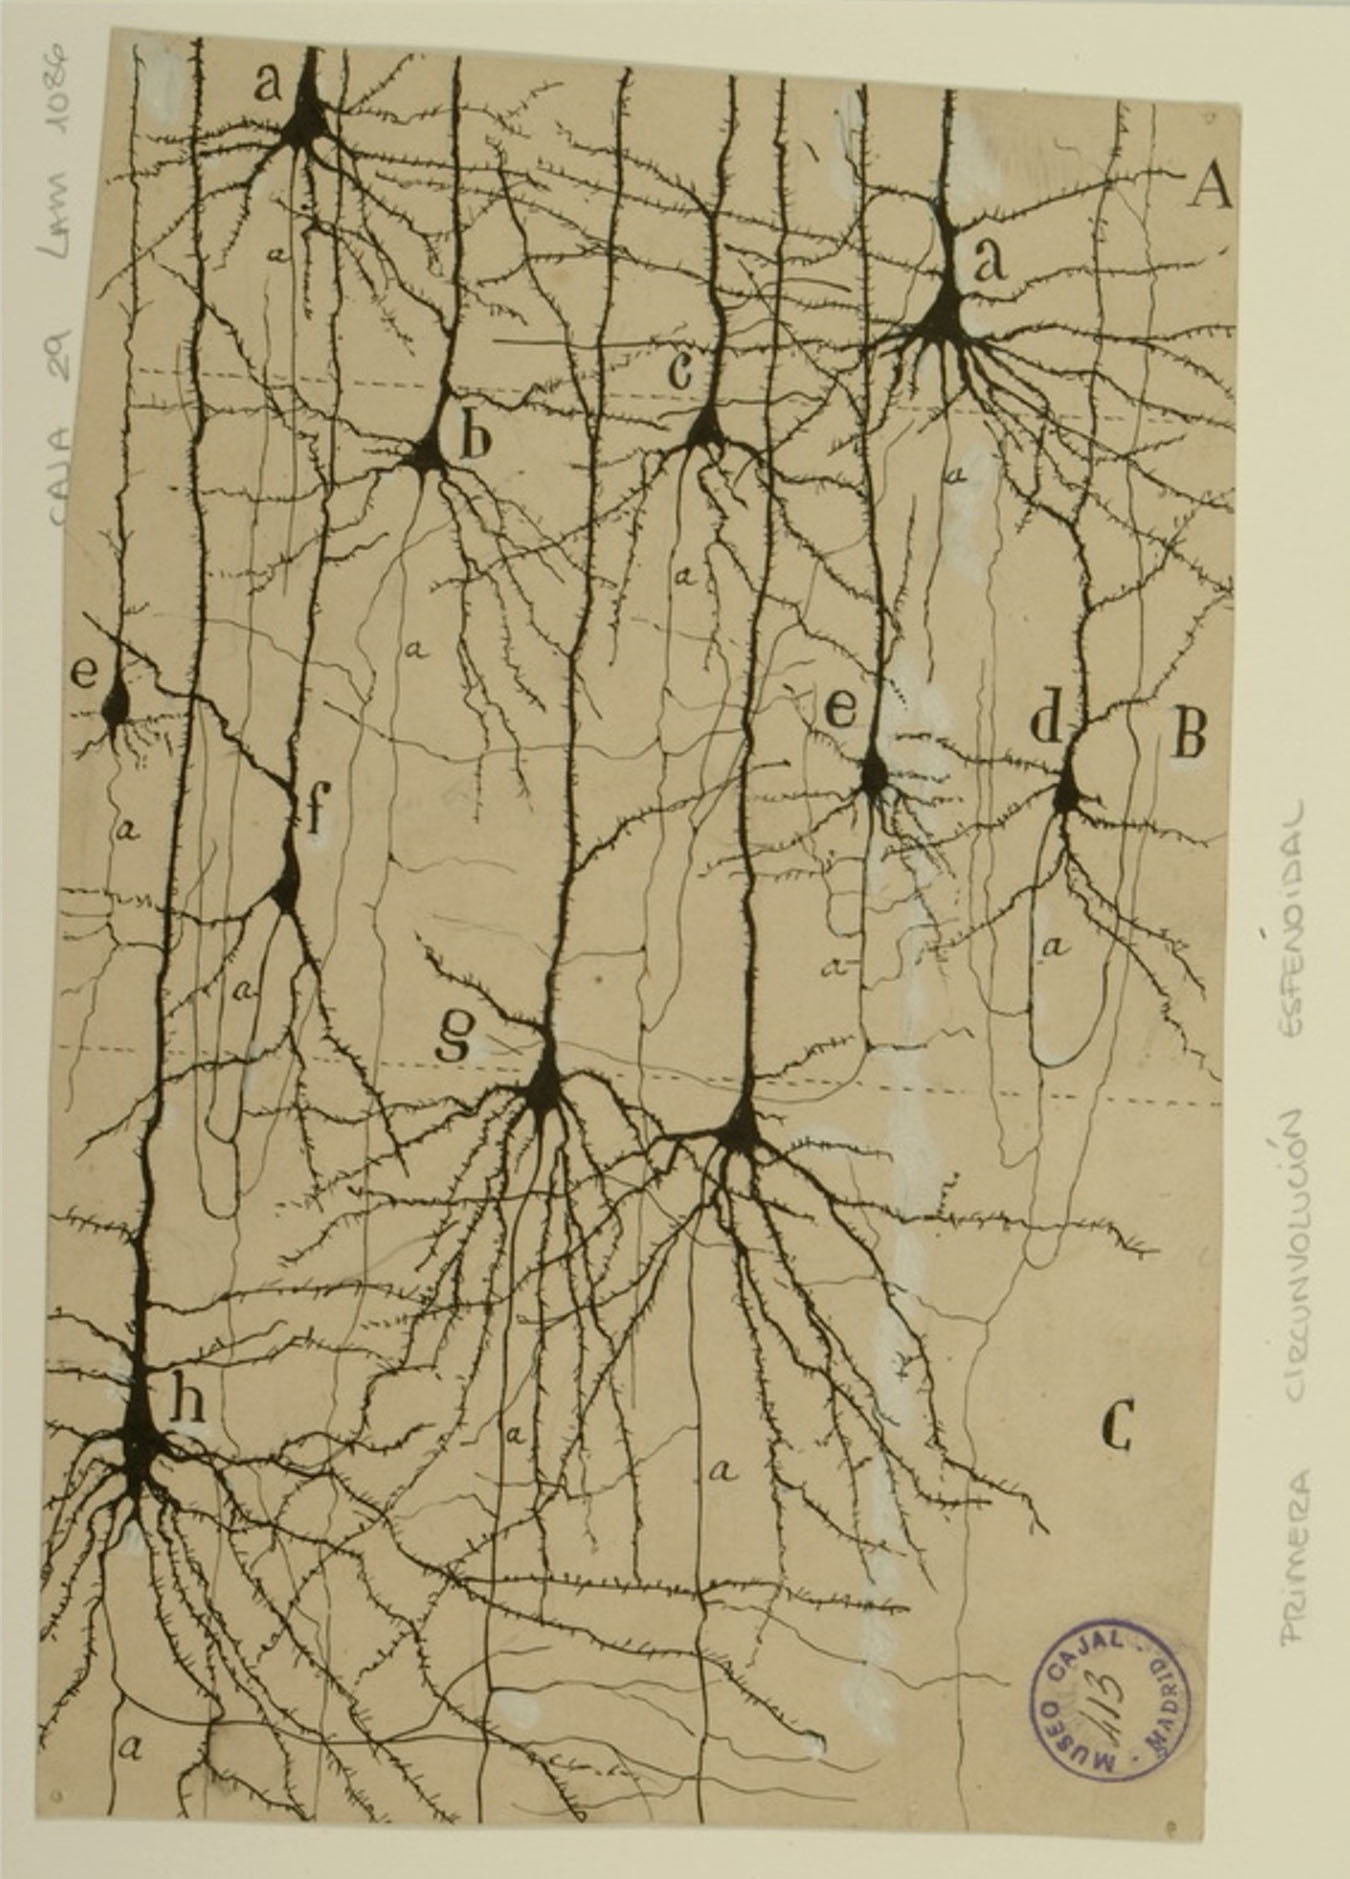 Illustration of sphenoidal cortex in a 25-day old infant